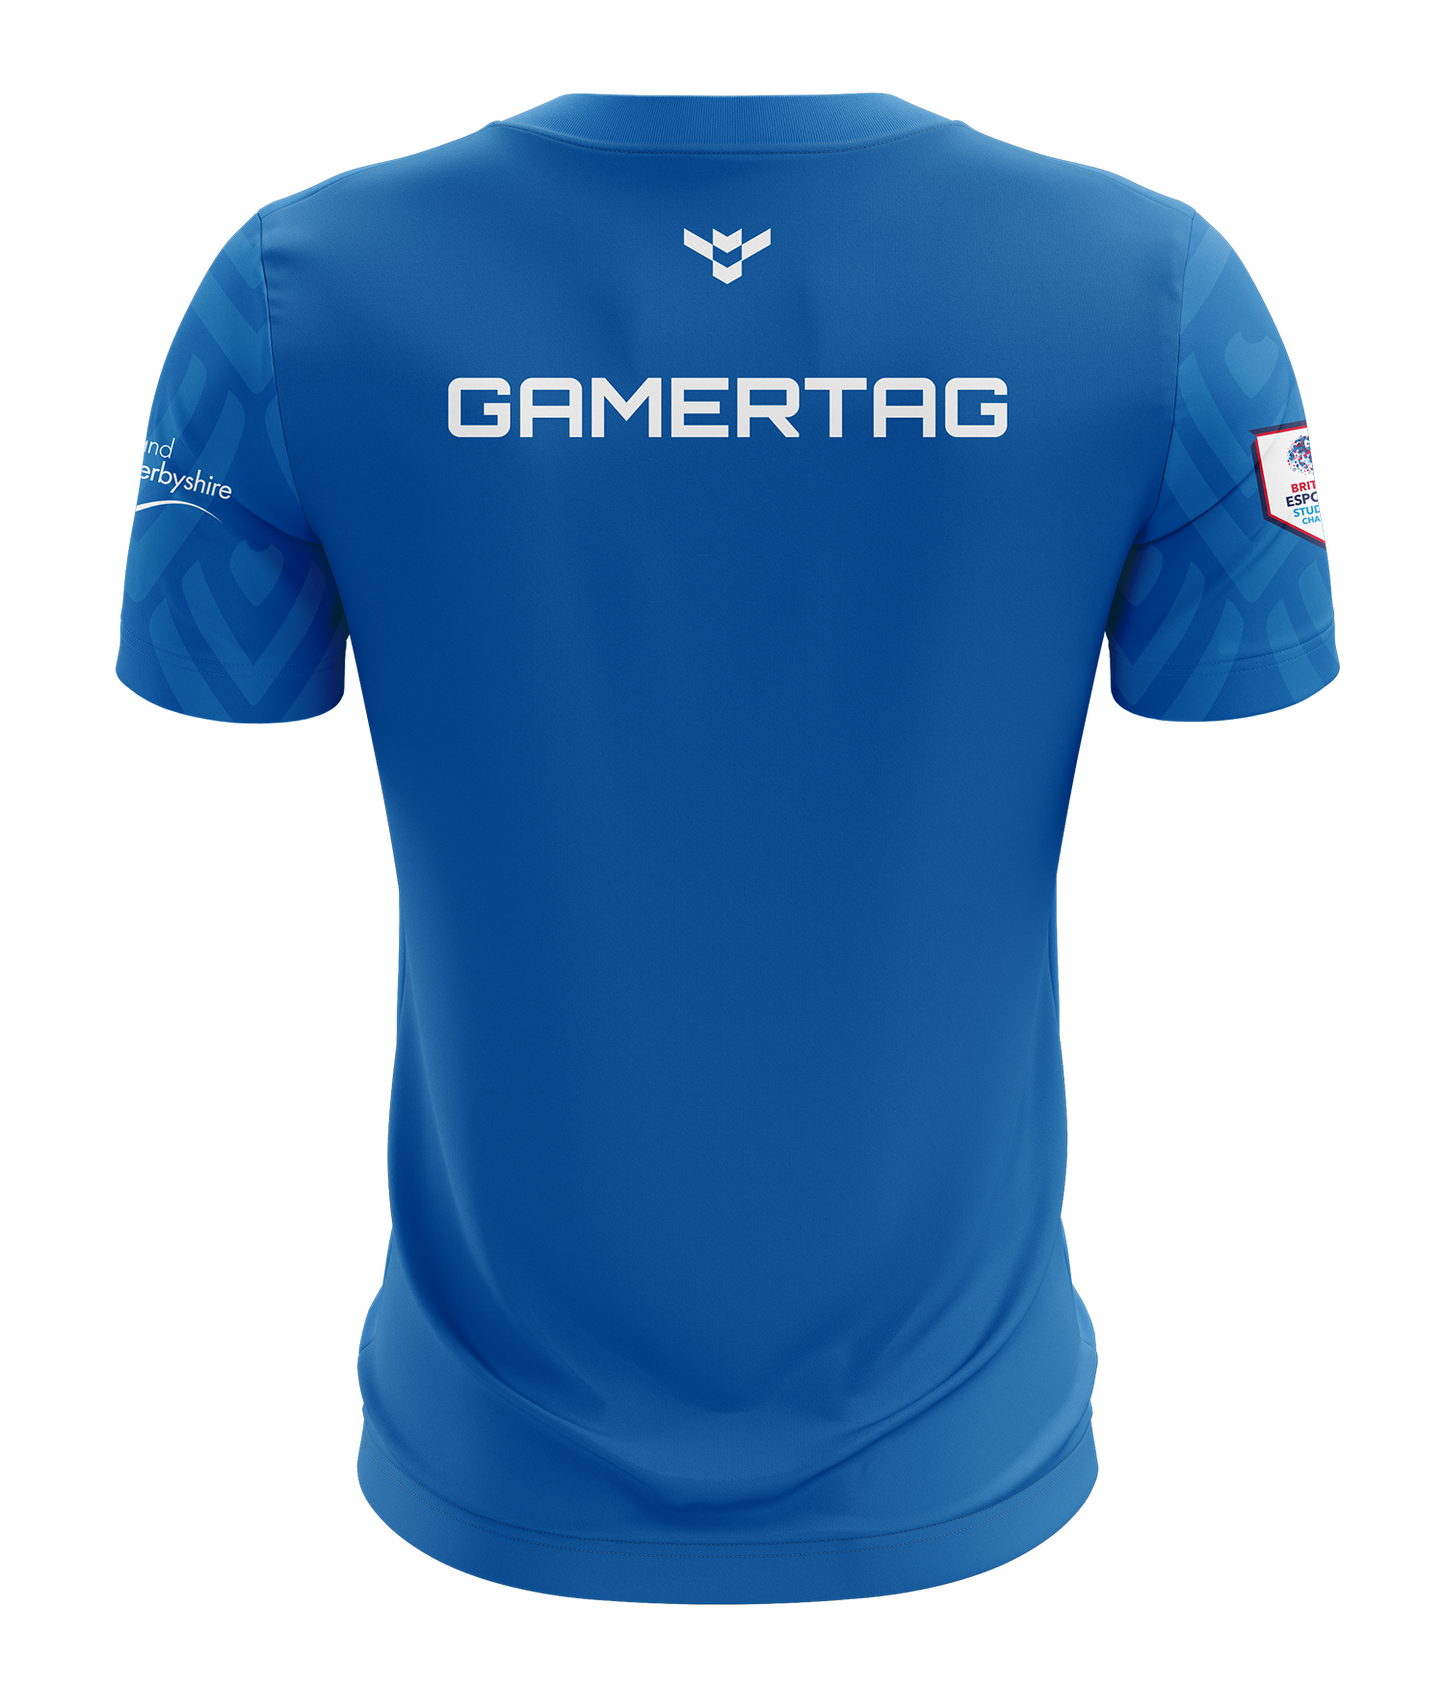 BSDC Swans Student Esports Jersey